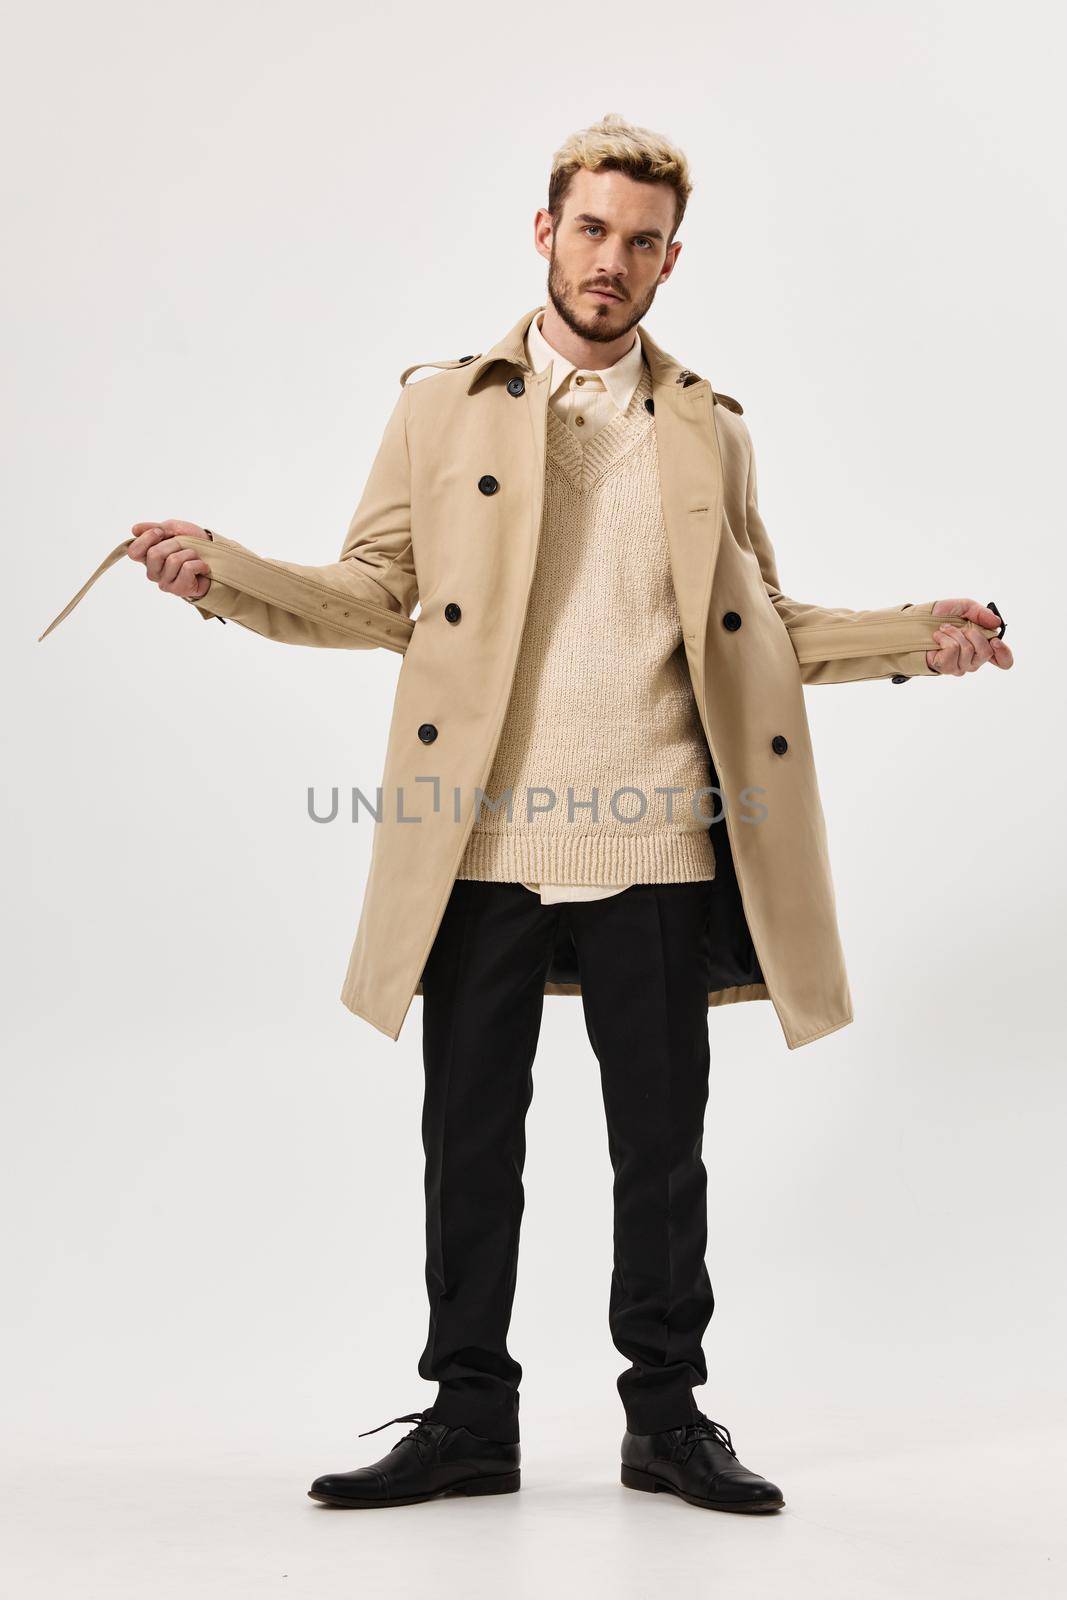 man in a beige coat fashionable hairstyle for autumn style Studio in full growth. High quality photo